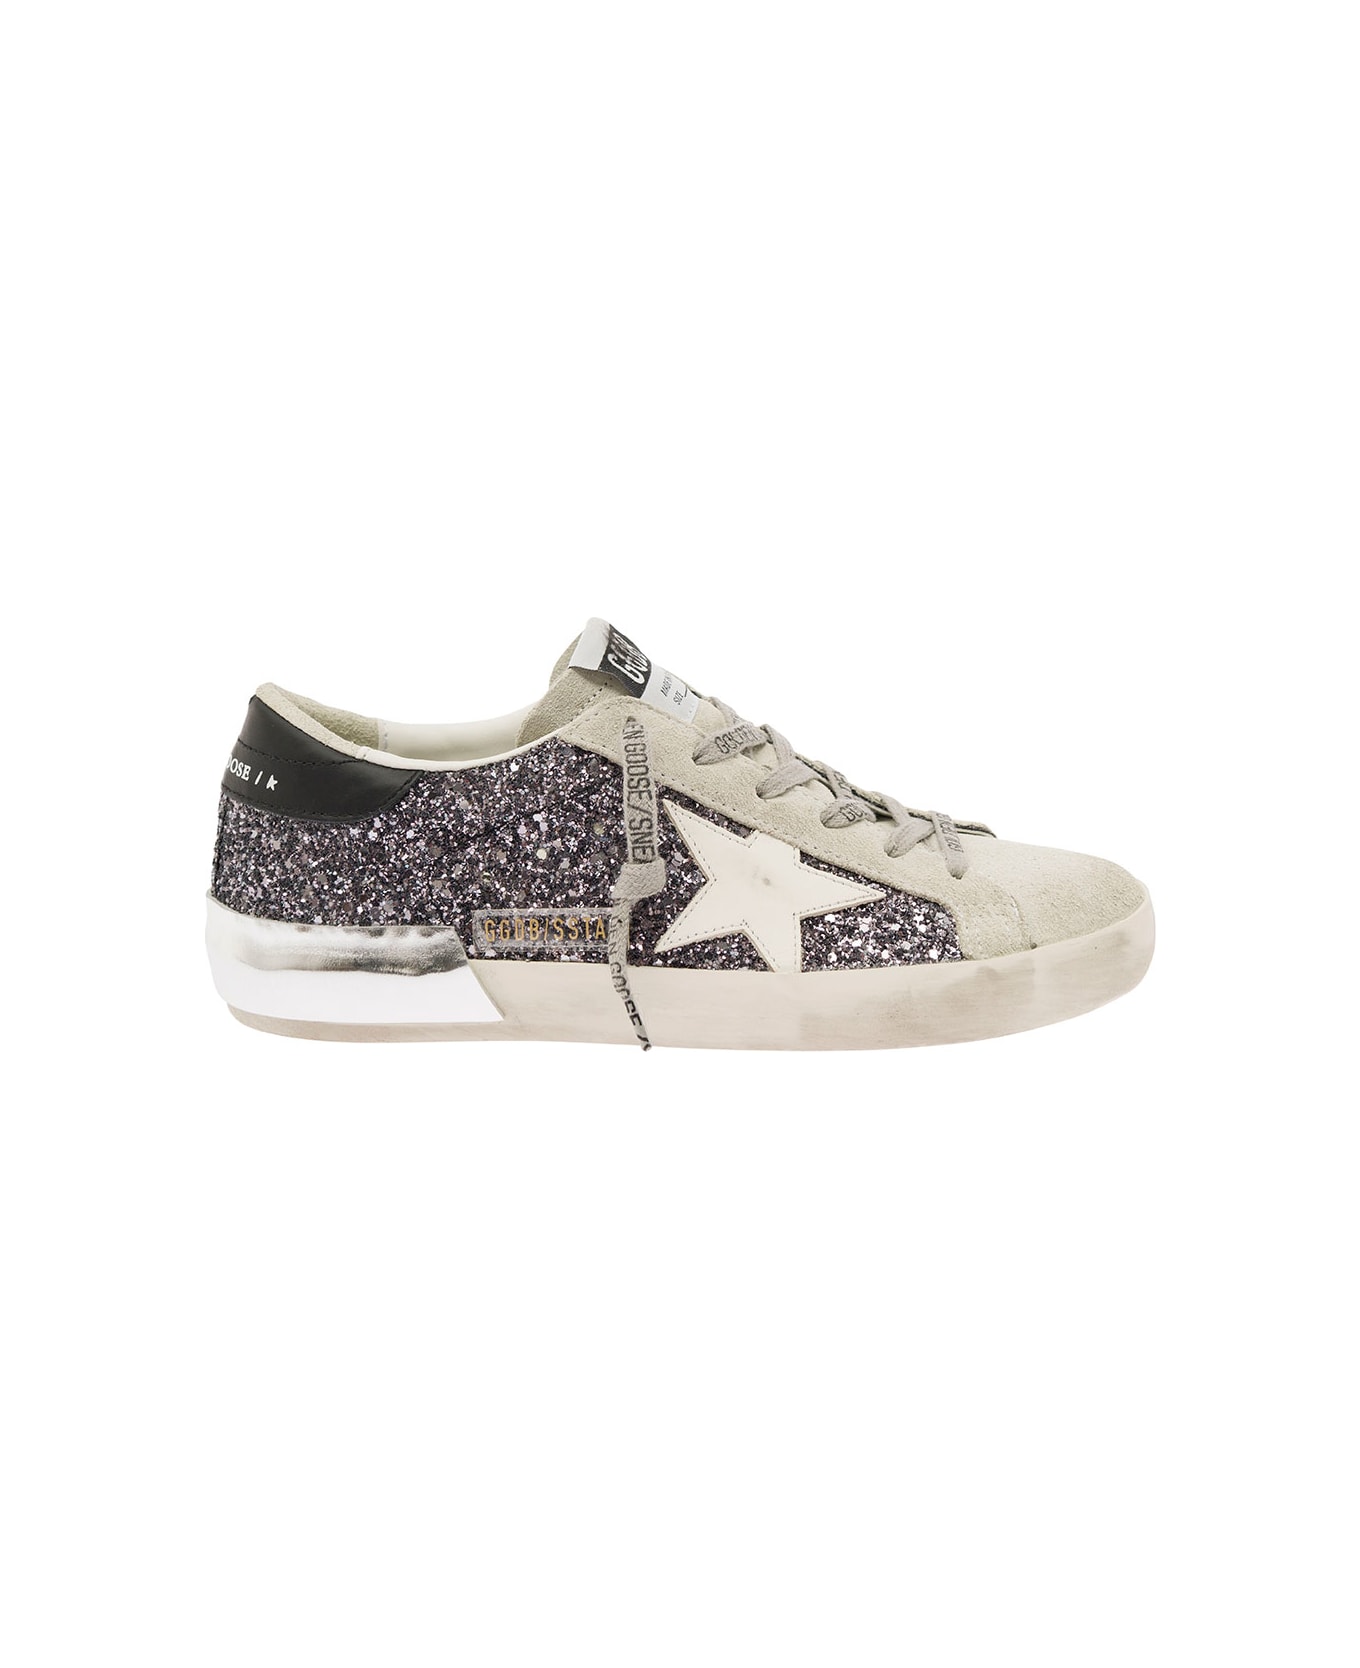 Golden Goose 'superstar' White Low Top Sneakers With Glitters In Vintage Looking Leather Woman - Grey